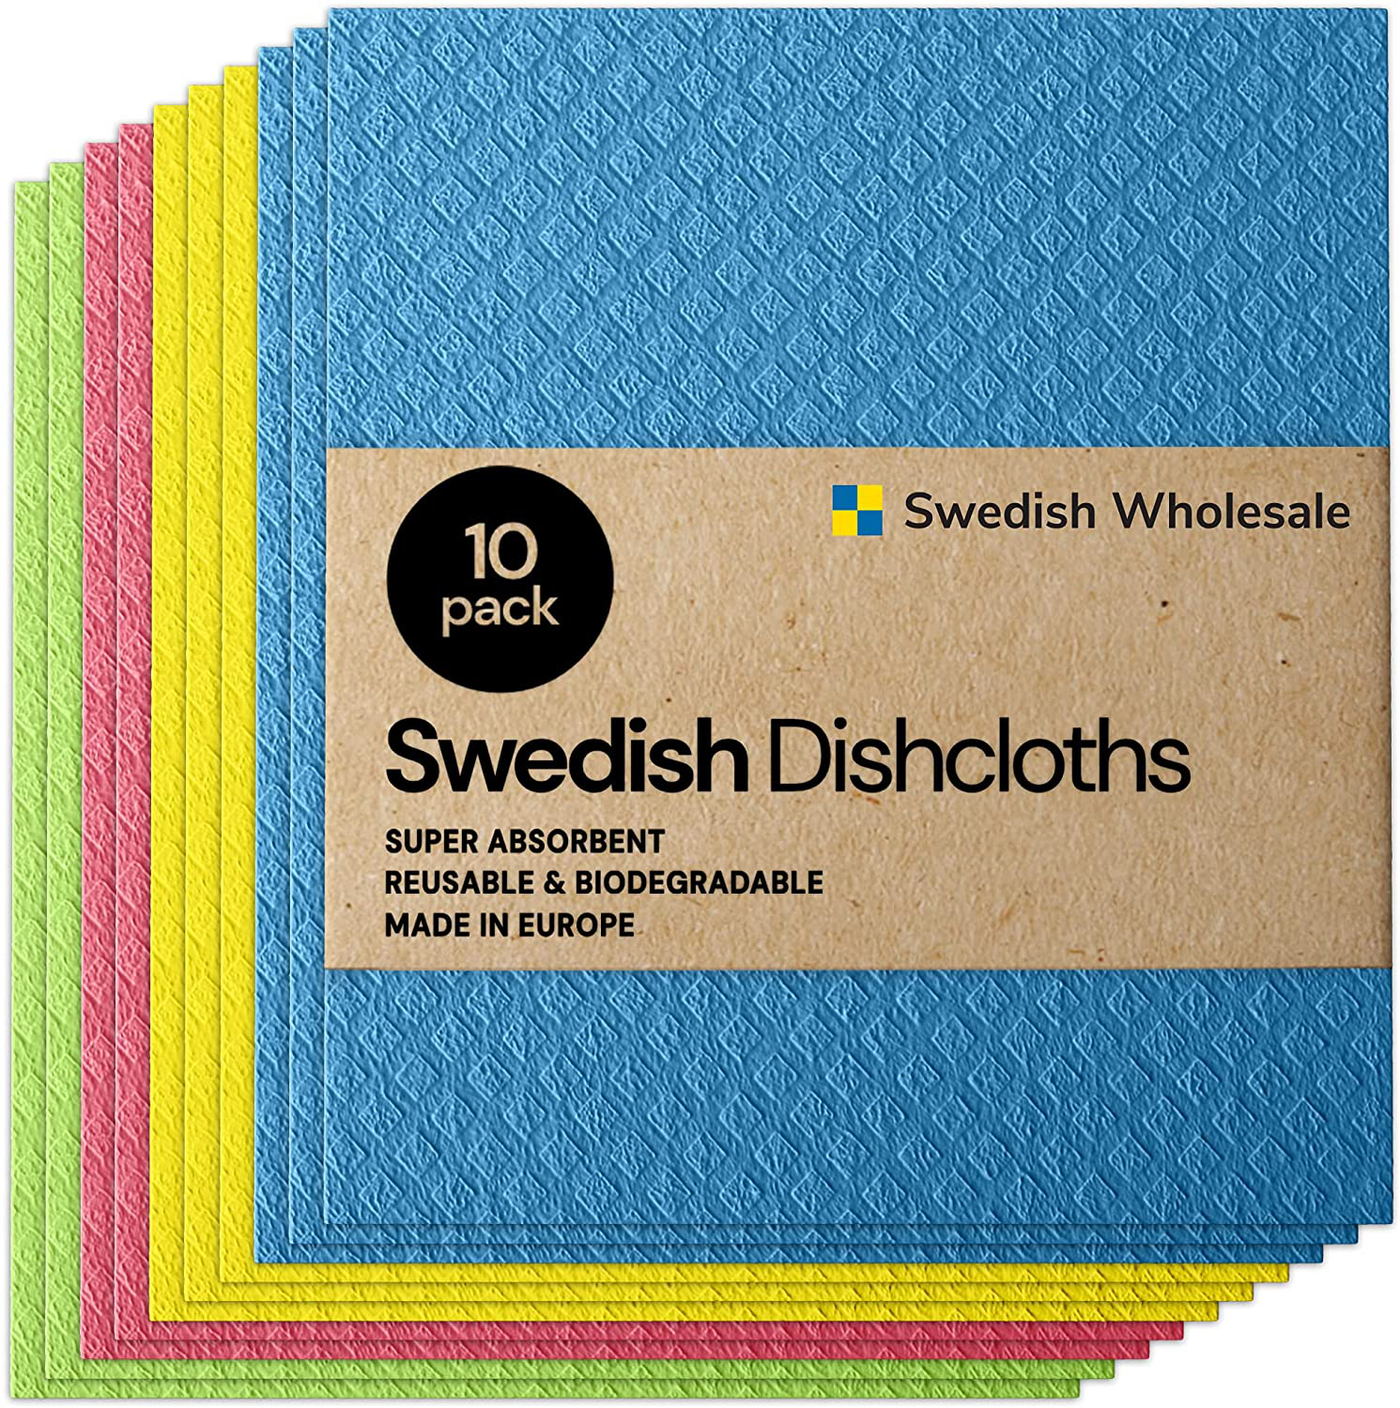 Swedish Wholesale Swedish Dish Cloths - Pack of 10, Reusable, Absorbent Hand Towels for Kitchen, Bathroom and Cleaning Counters - Cellulose Sponge Cloth - Assorted